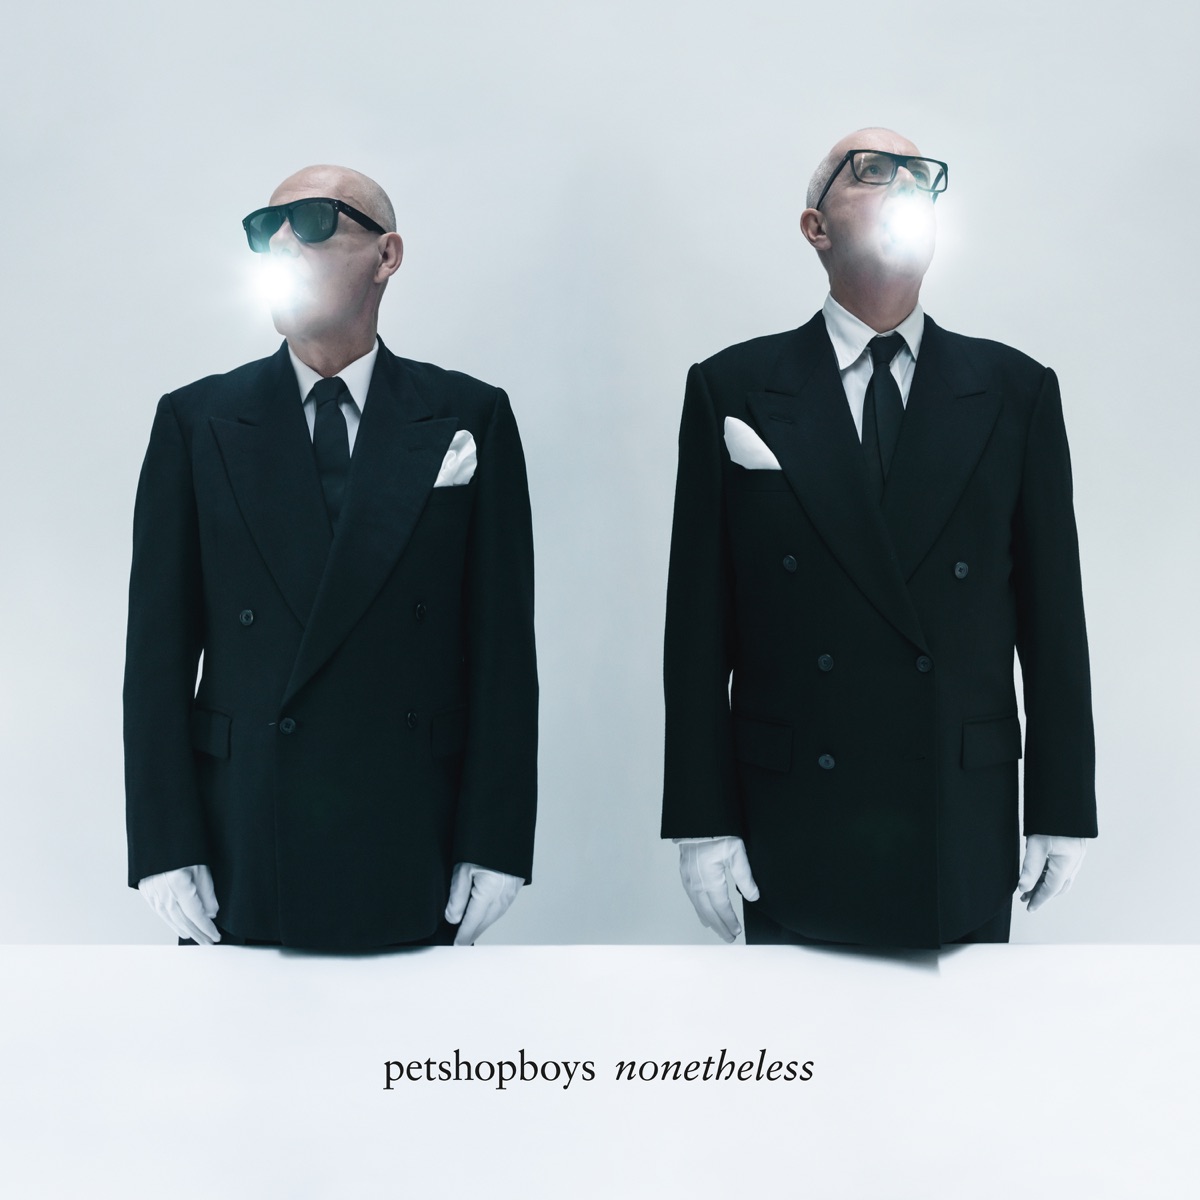 Have YOU heard @petshopboys' new album ‘Nonetheless’ yet? | Read our review by @marramark + listen to the album here: album.ink/PSBnonetheless